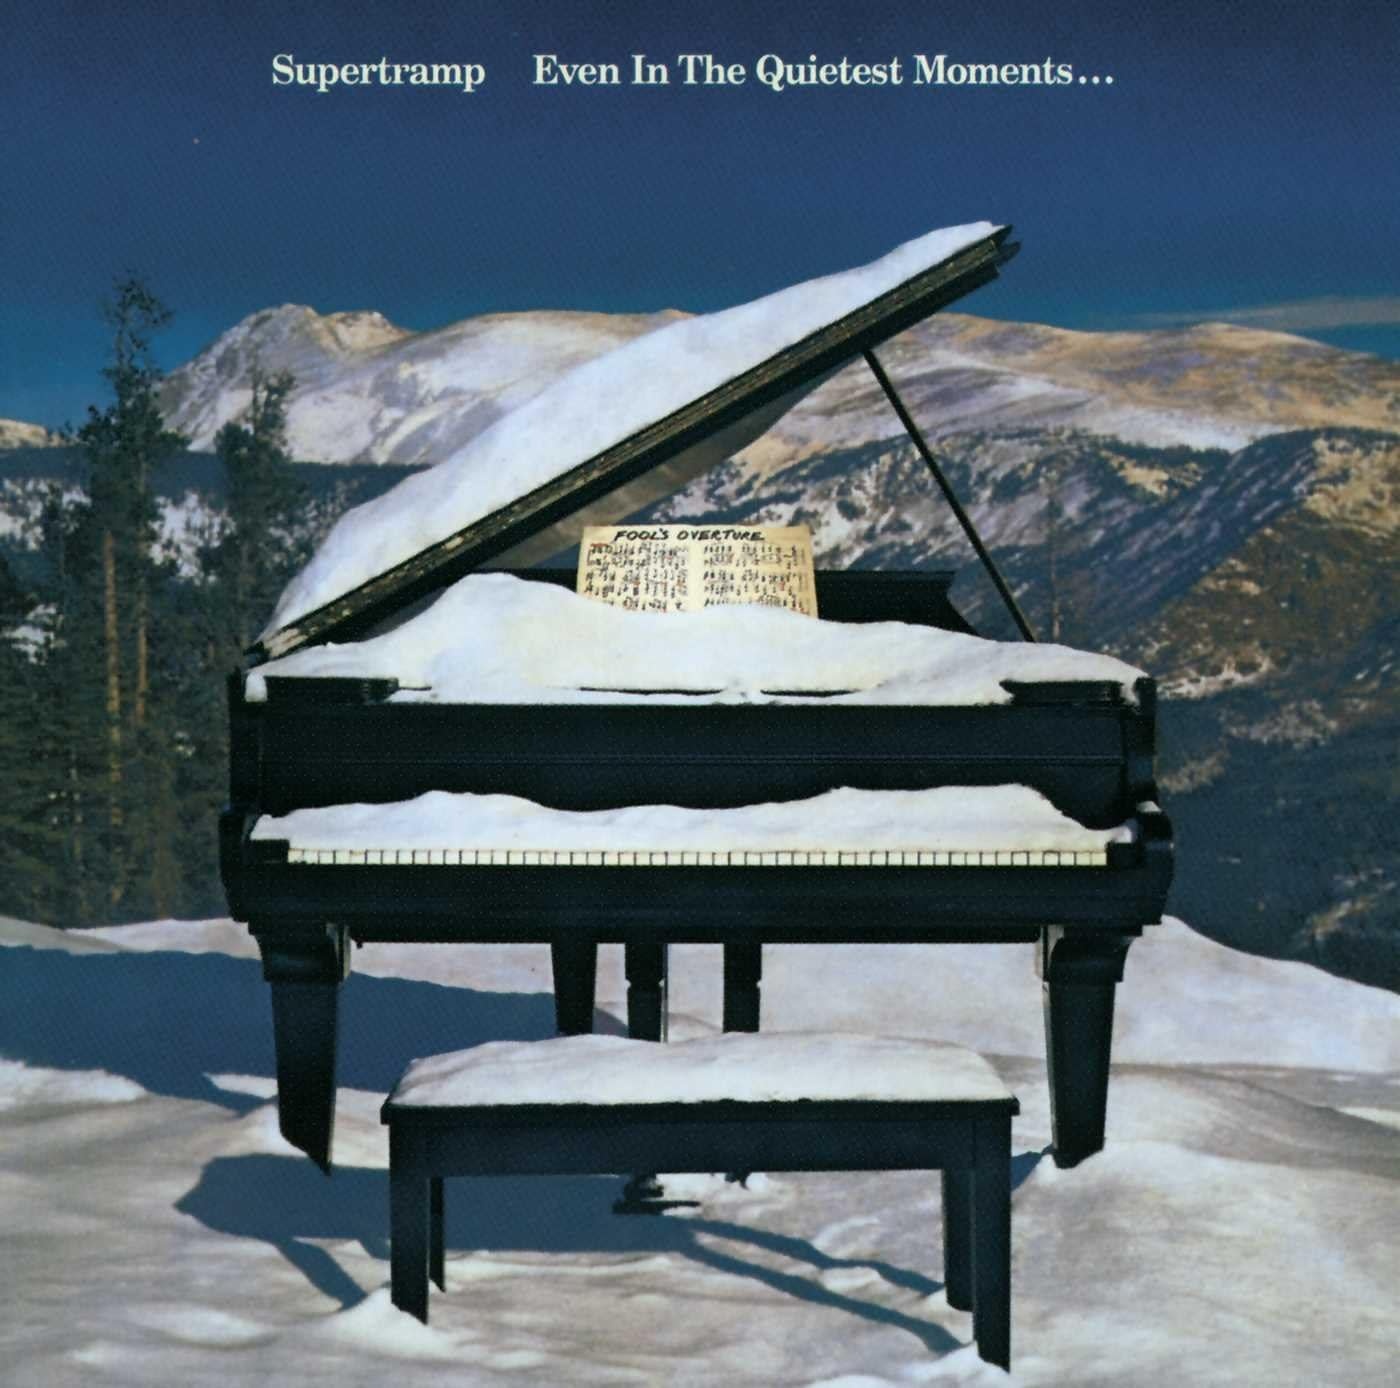 Rock/Pop Supertramp - Even In The Quietest Moments (USED CD)